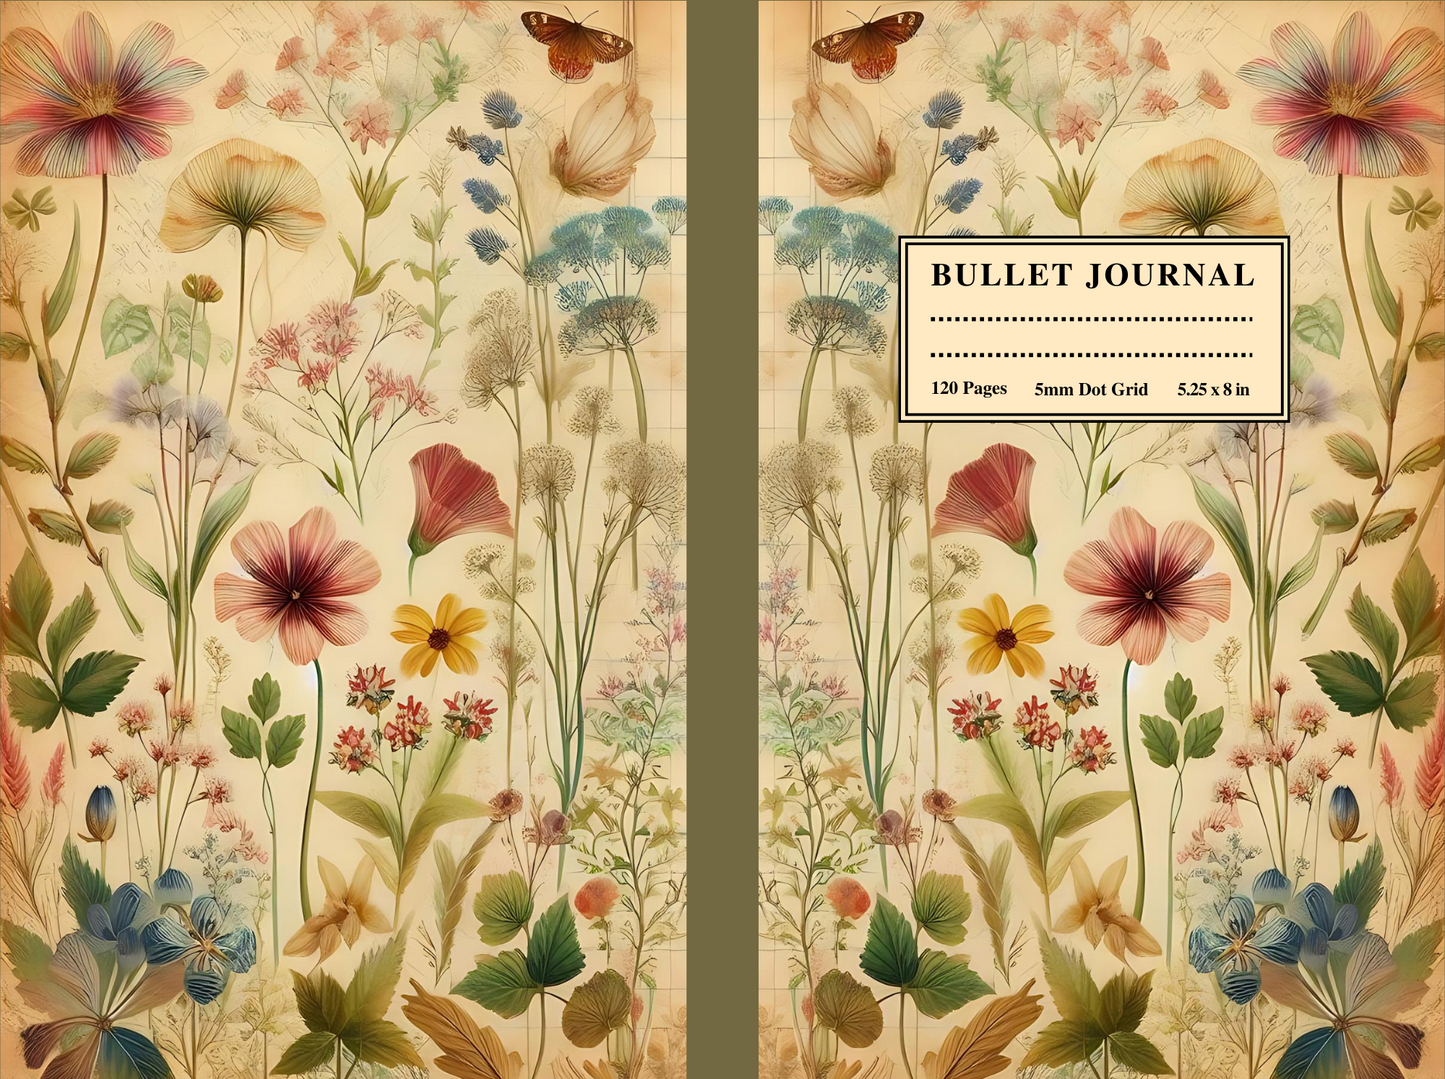 Bullet Journal: Vintage Floral Dotted Notebook 5.25" x 8" Softcover 120 Cream 5mm Dot Grid Pages For Creative Journaling, Doodling, Vision Boards, Sketching, Mood Tracker & More